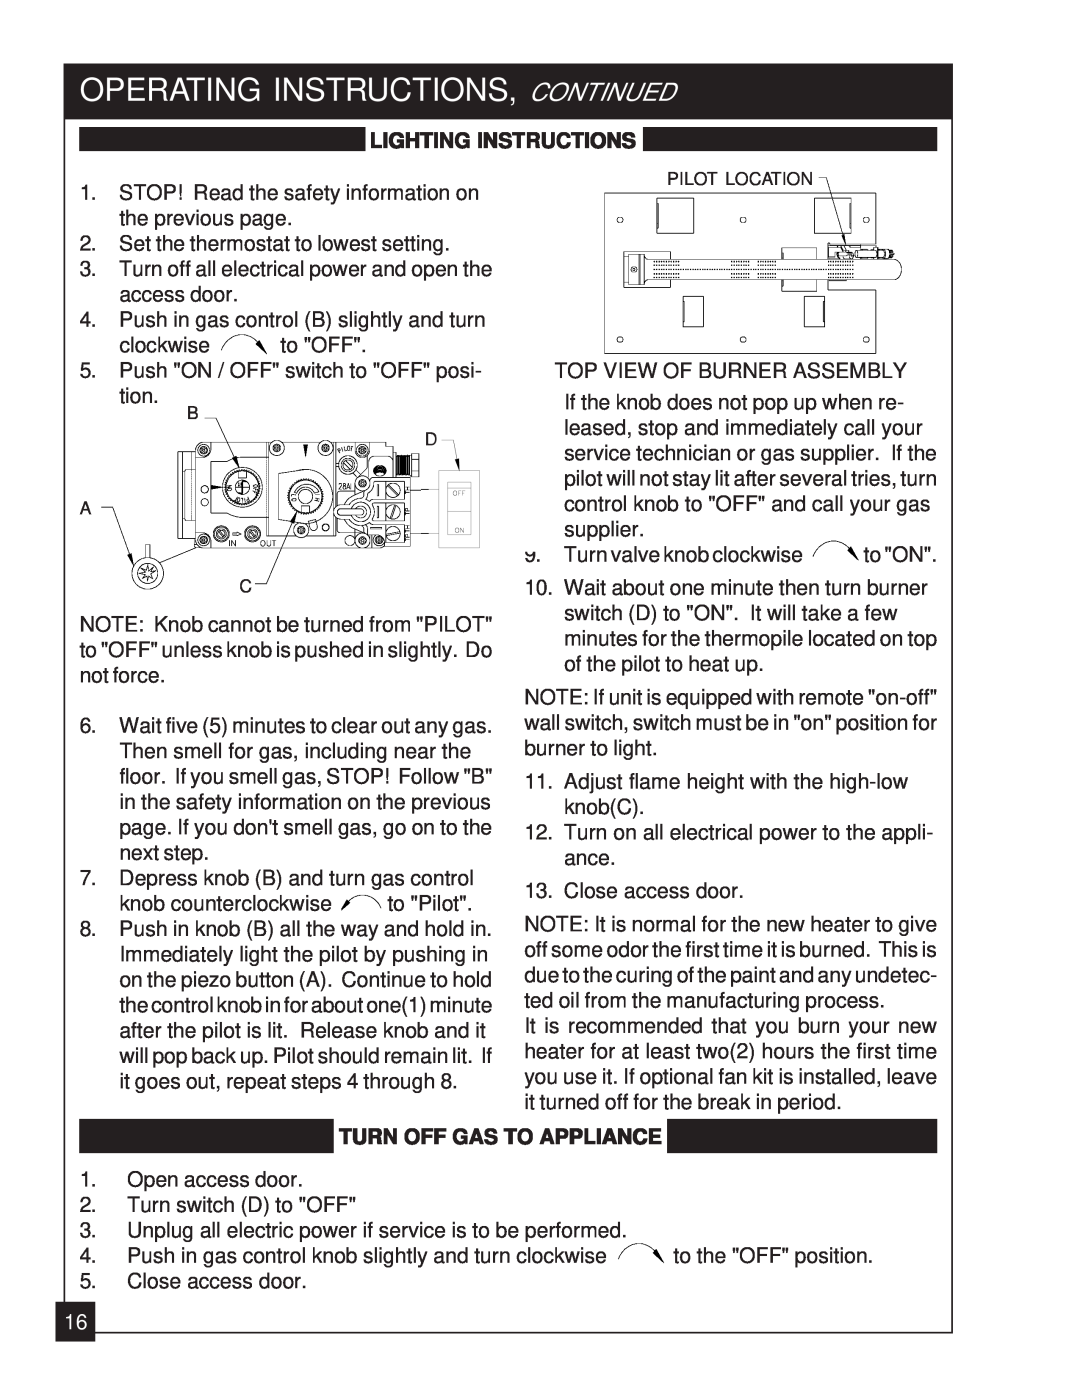 United States Stove 2020N manual Operating Instructions, Continued, Lighting Instructions, Turn Off Gas To Appliance 